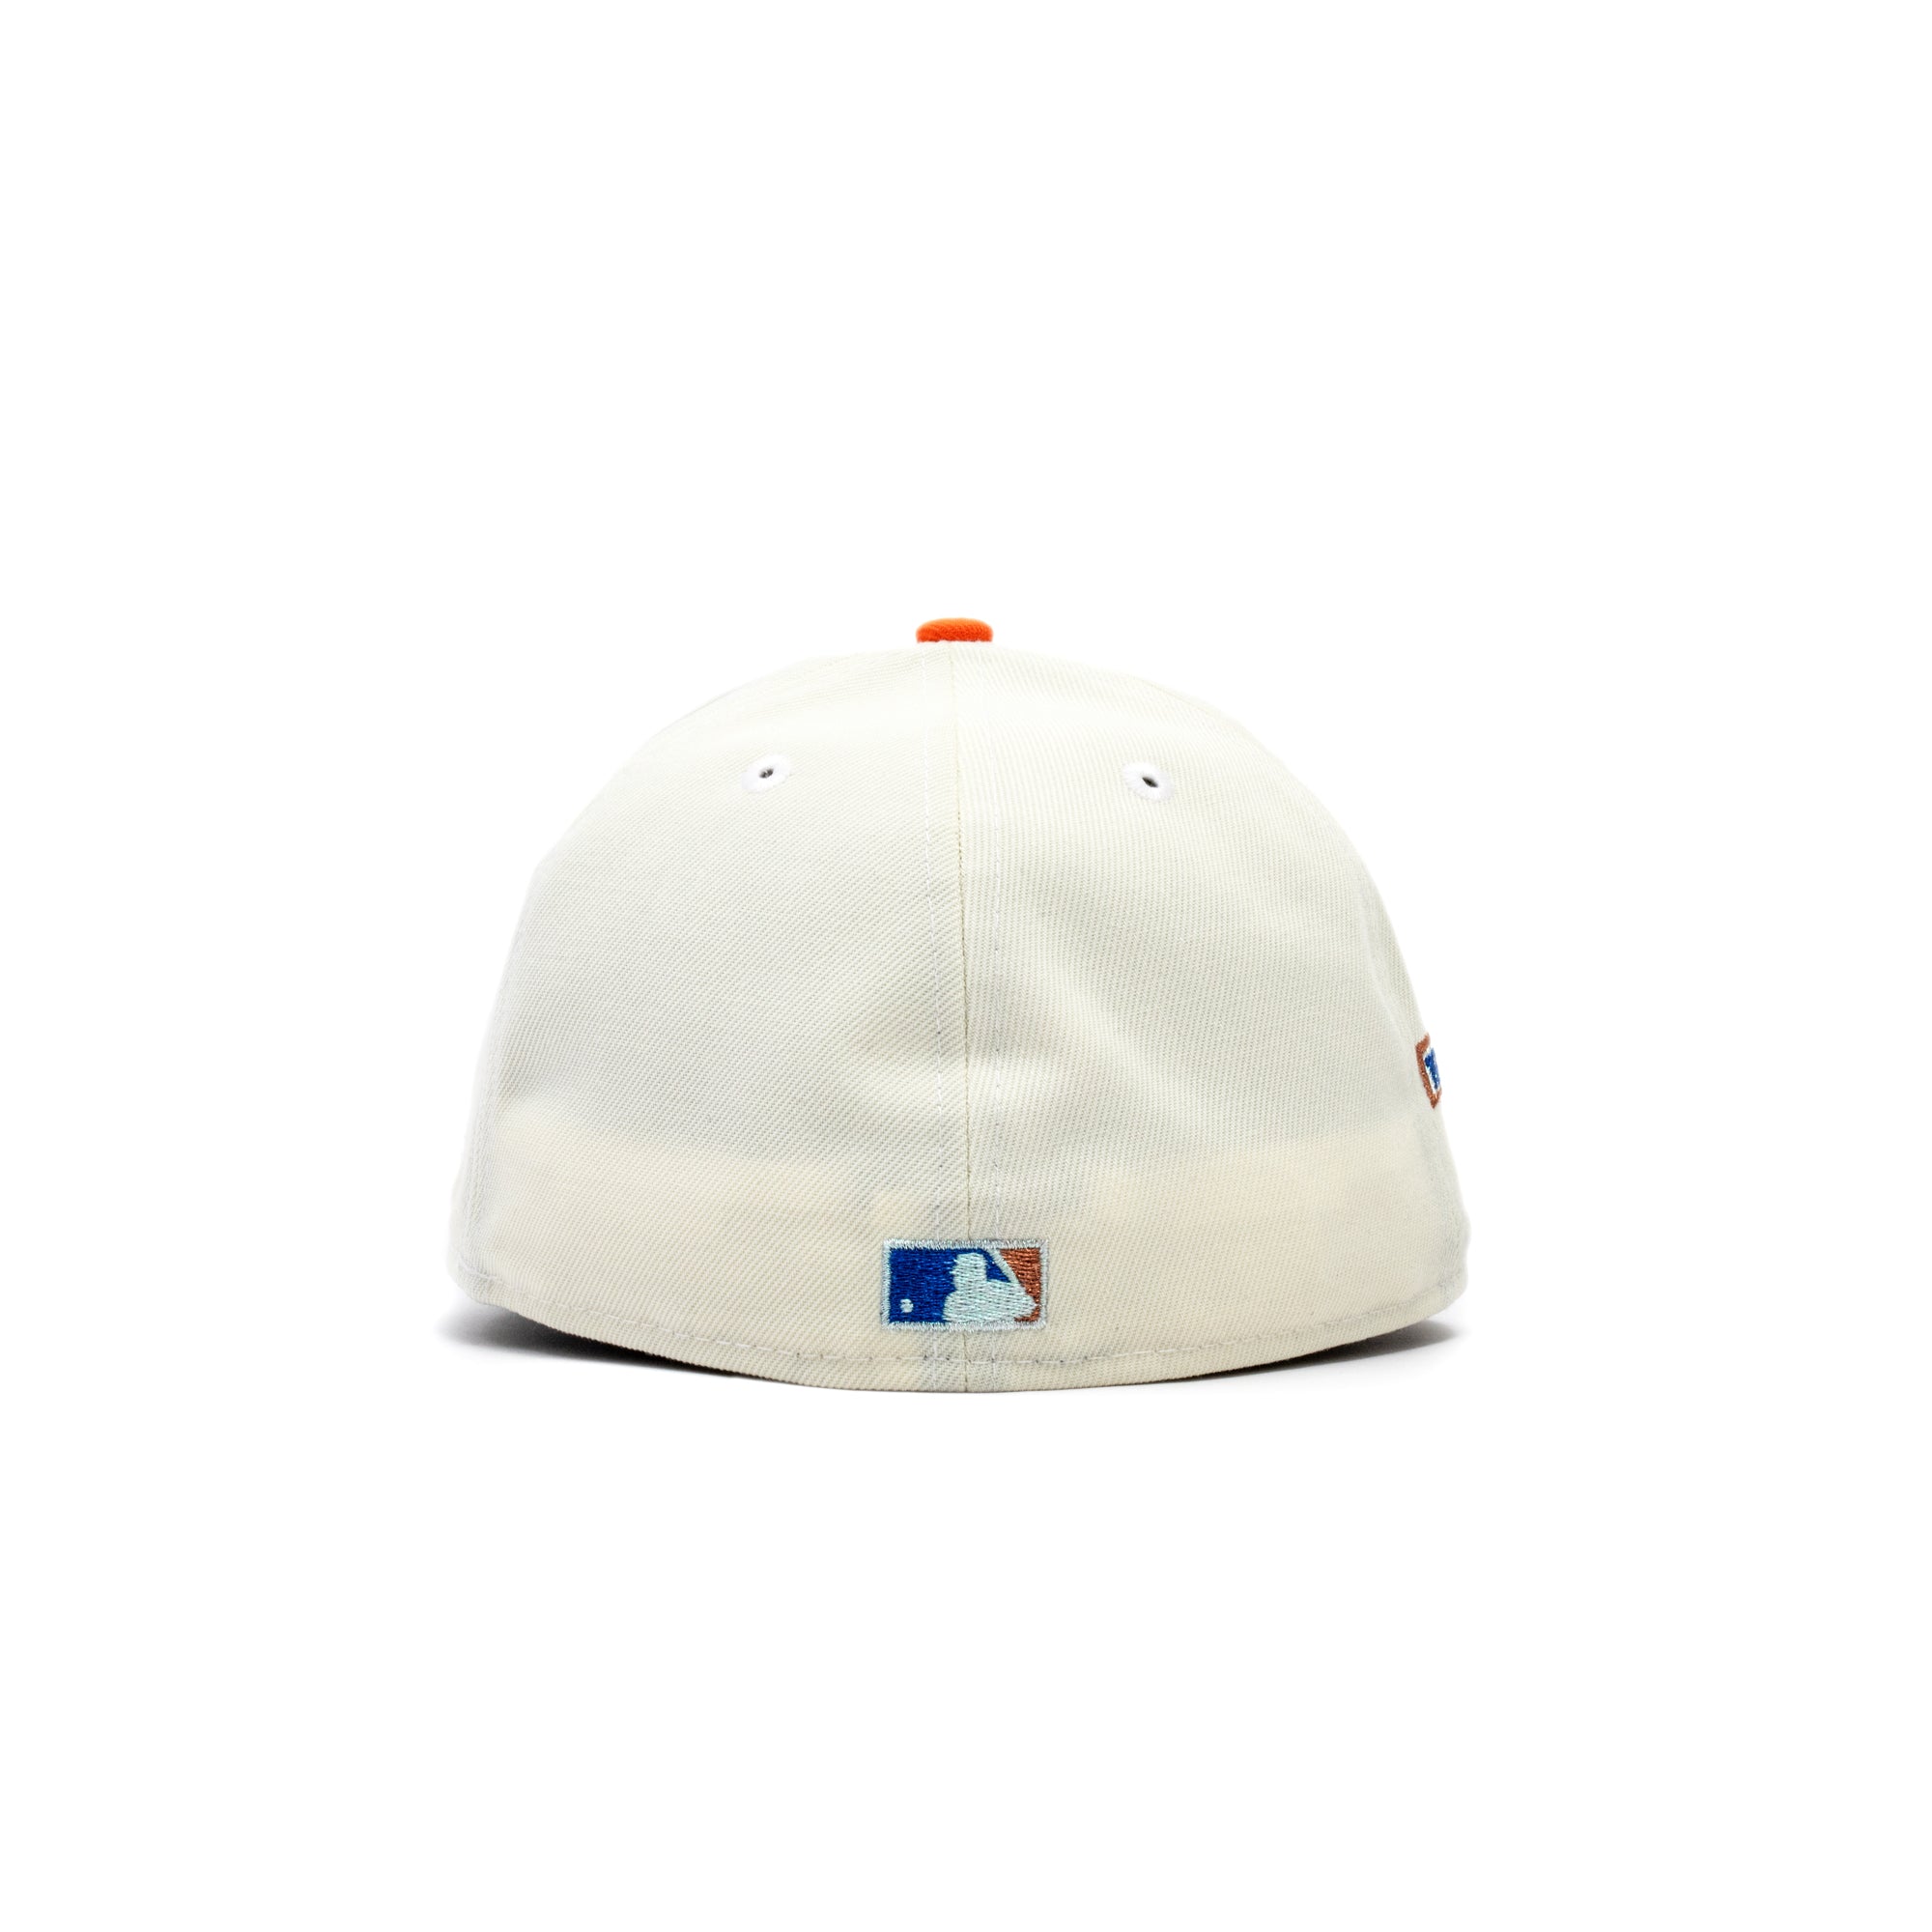 New Era 59Fifty Caps & Kegs Mets Chrome Fitted Hat